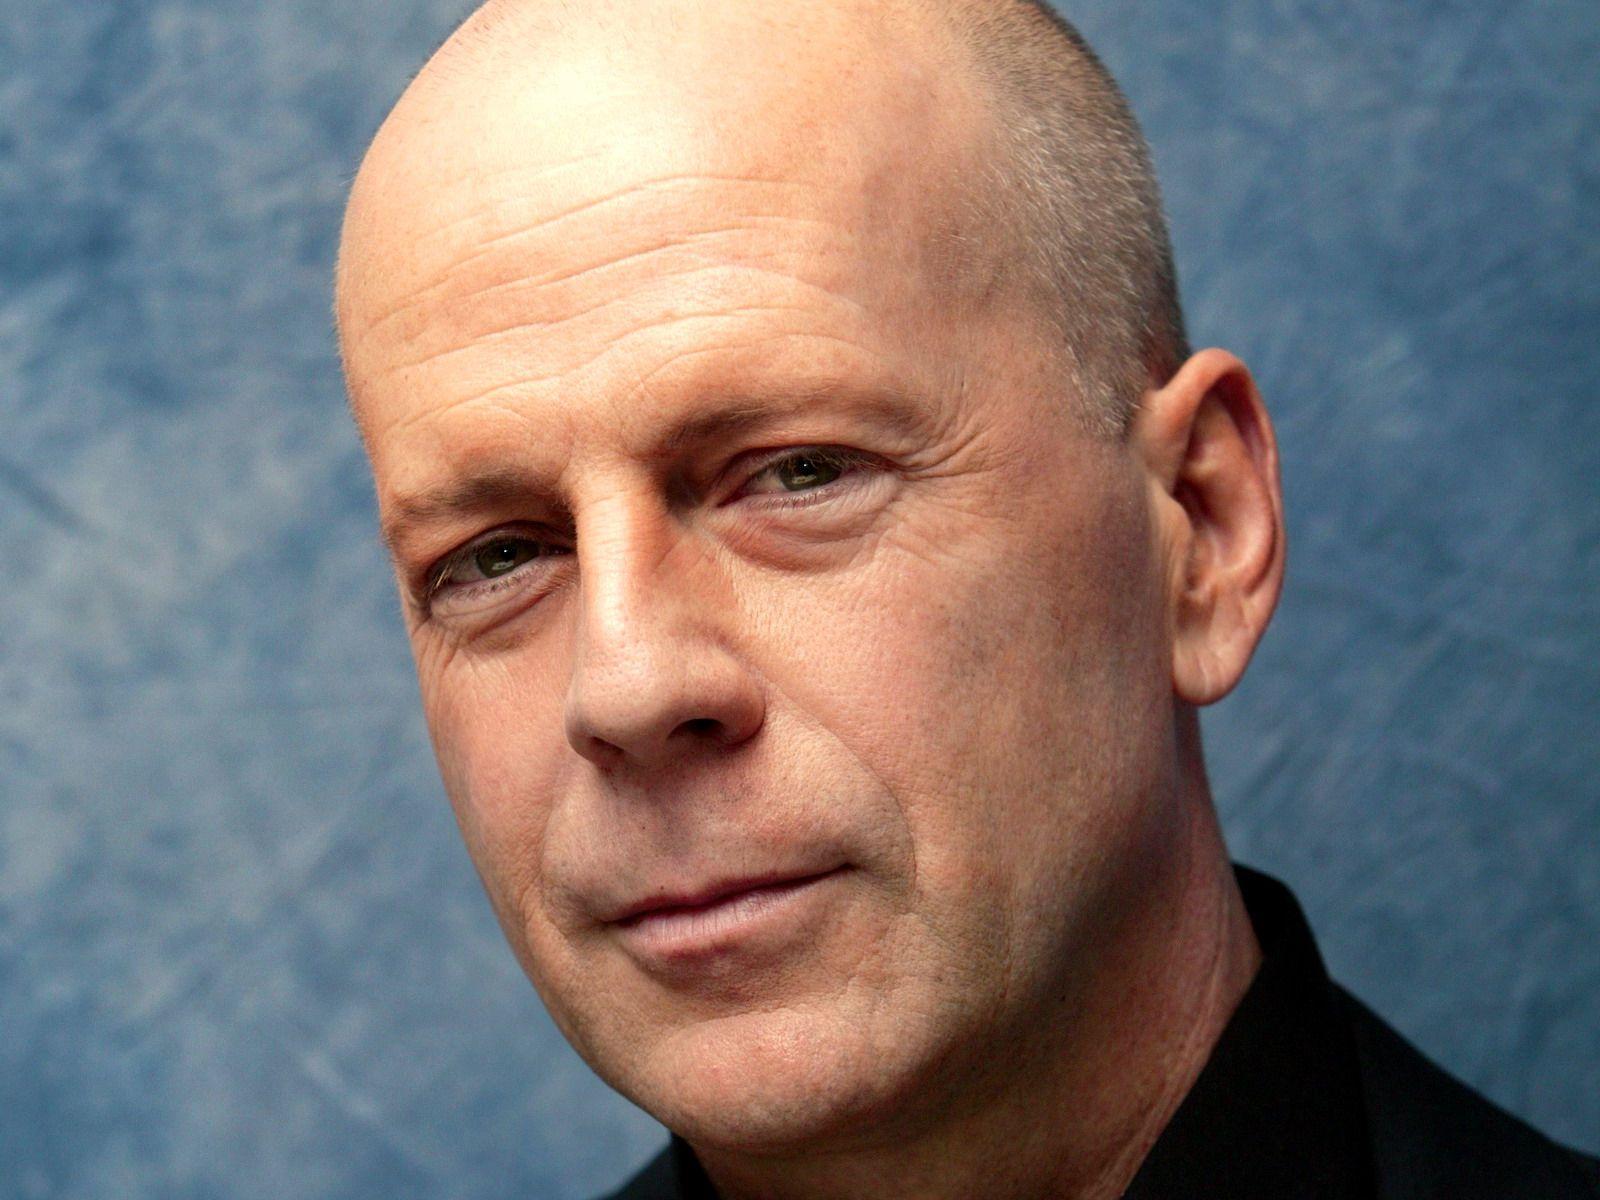 Awesome Bruce Willis Wall. Bruce Willis Wallpaper